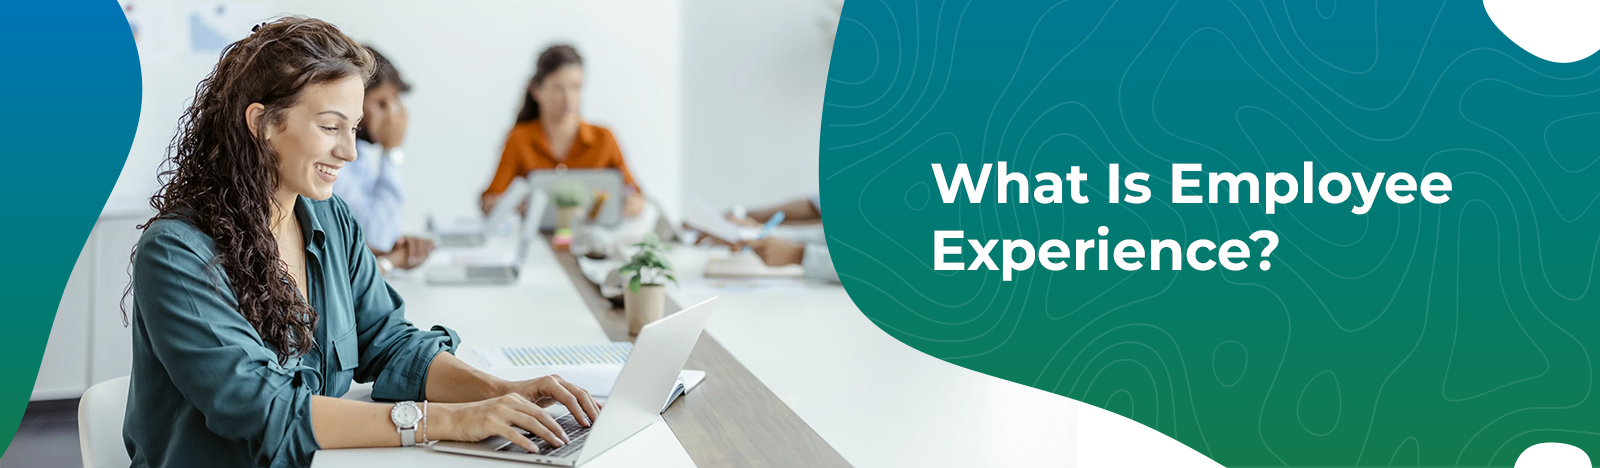 What Is Employee Experience? A Detailed Infographic